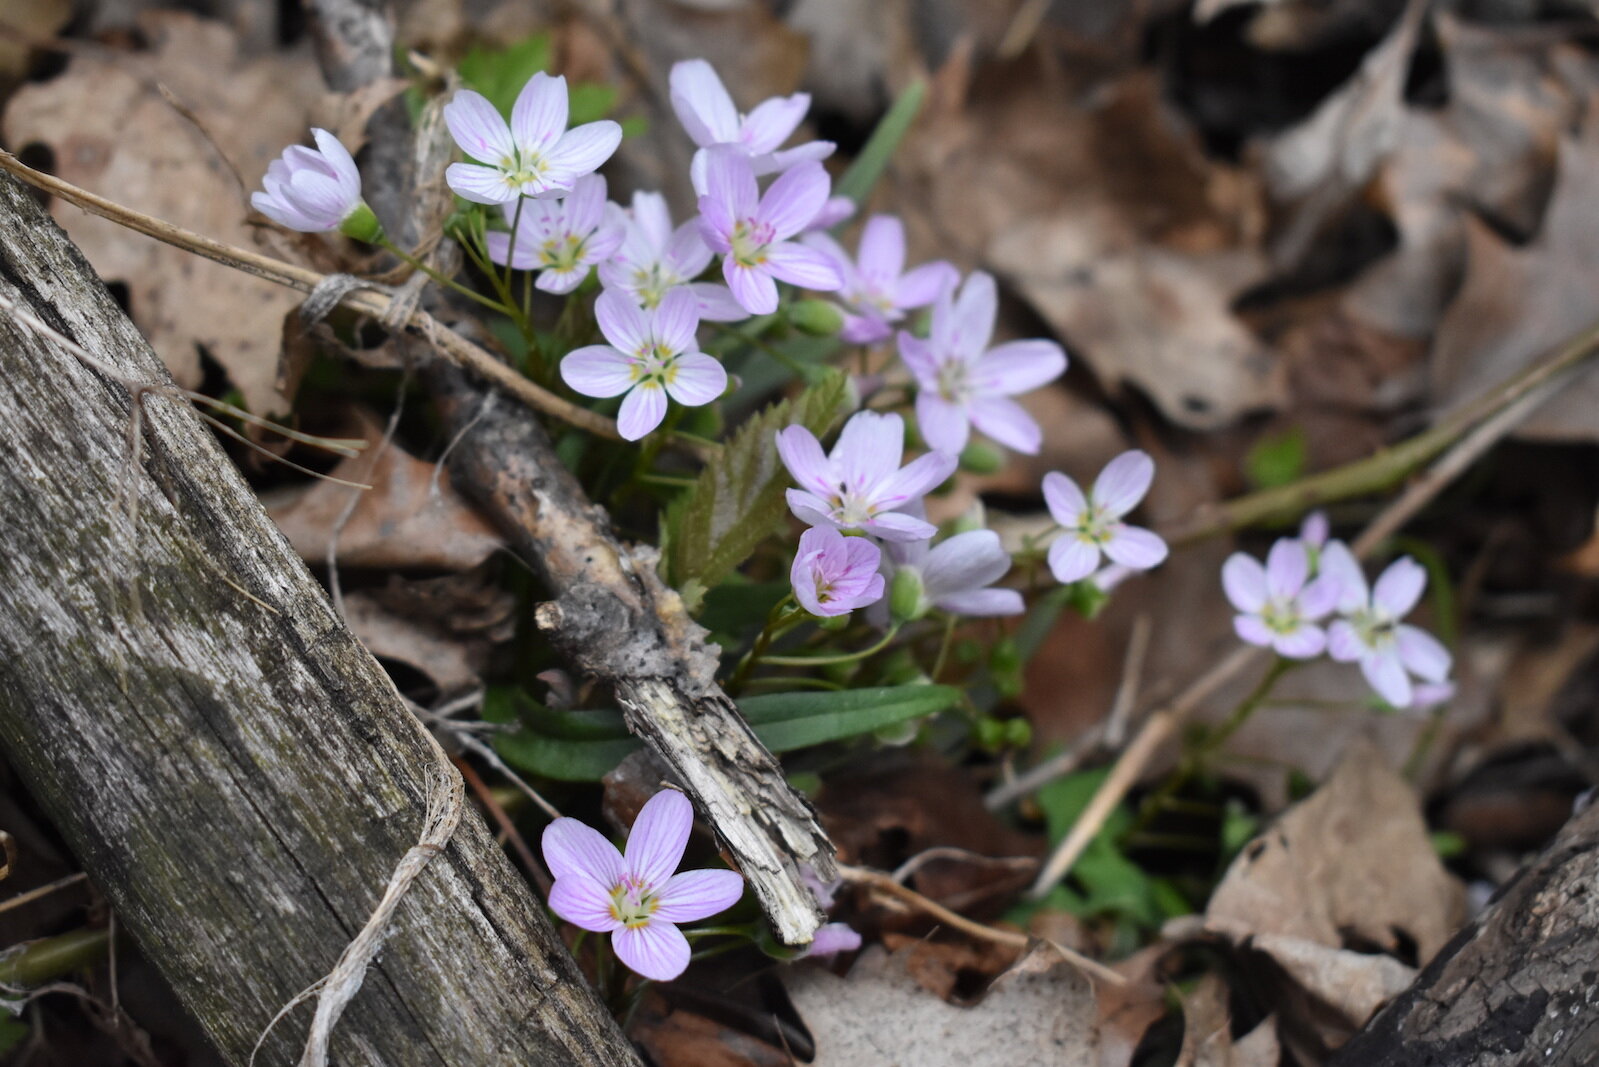 Spring Beauties at Porter Legacy Dunes. Photo by Amelia Hansen